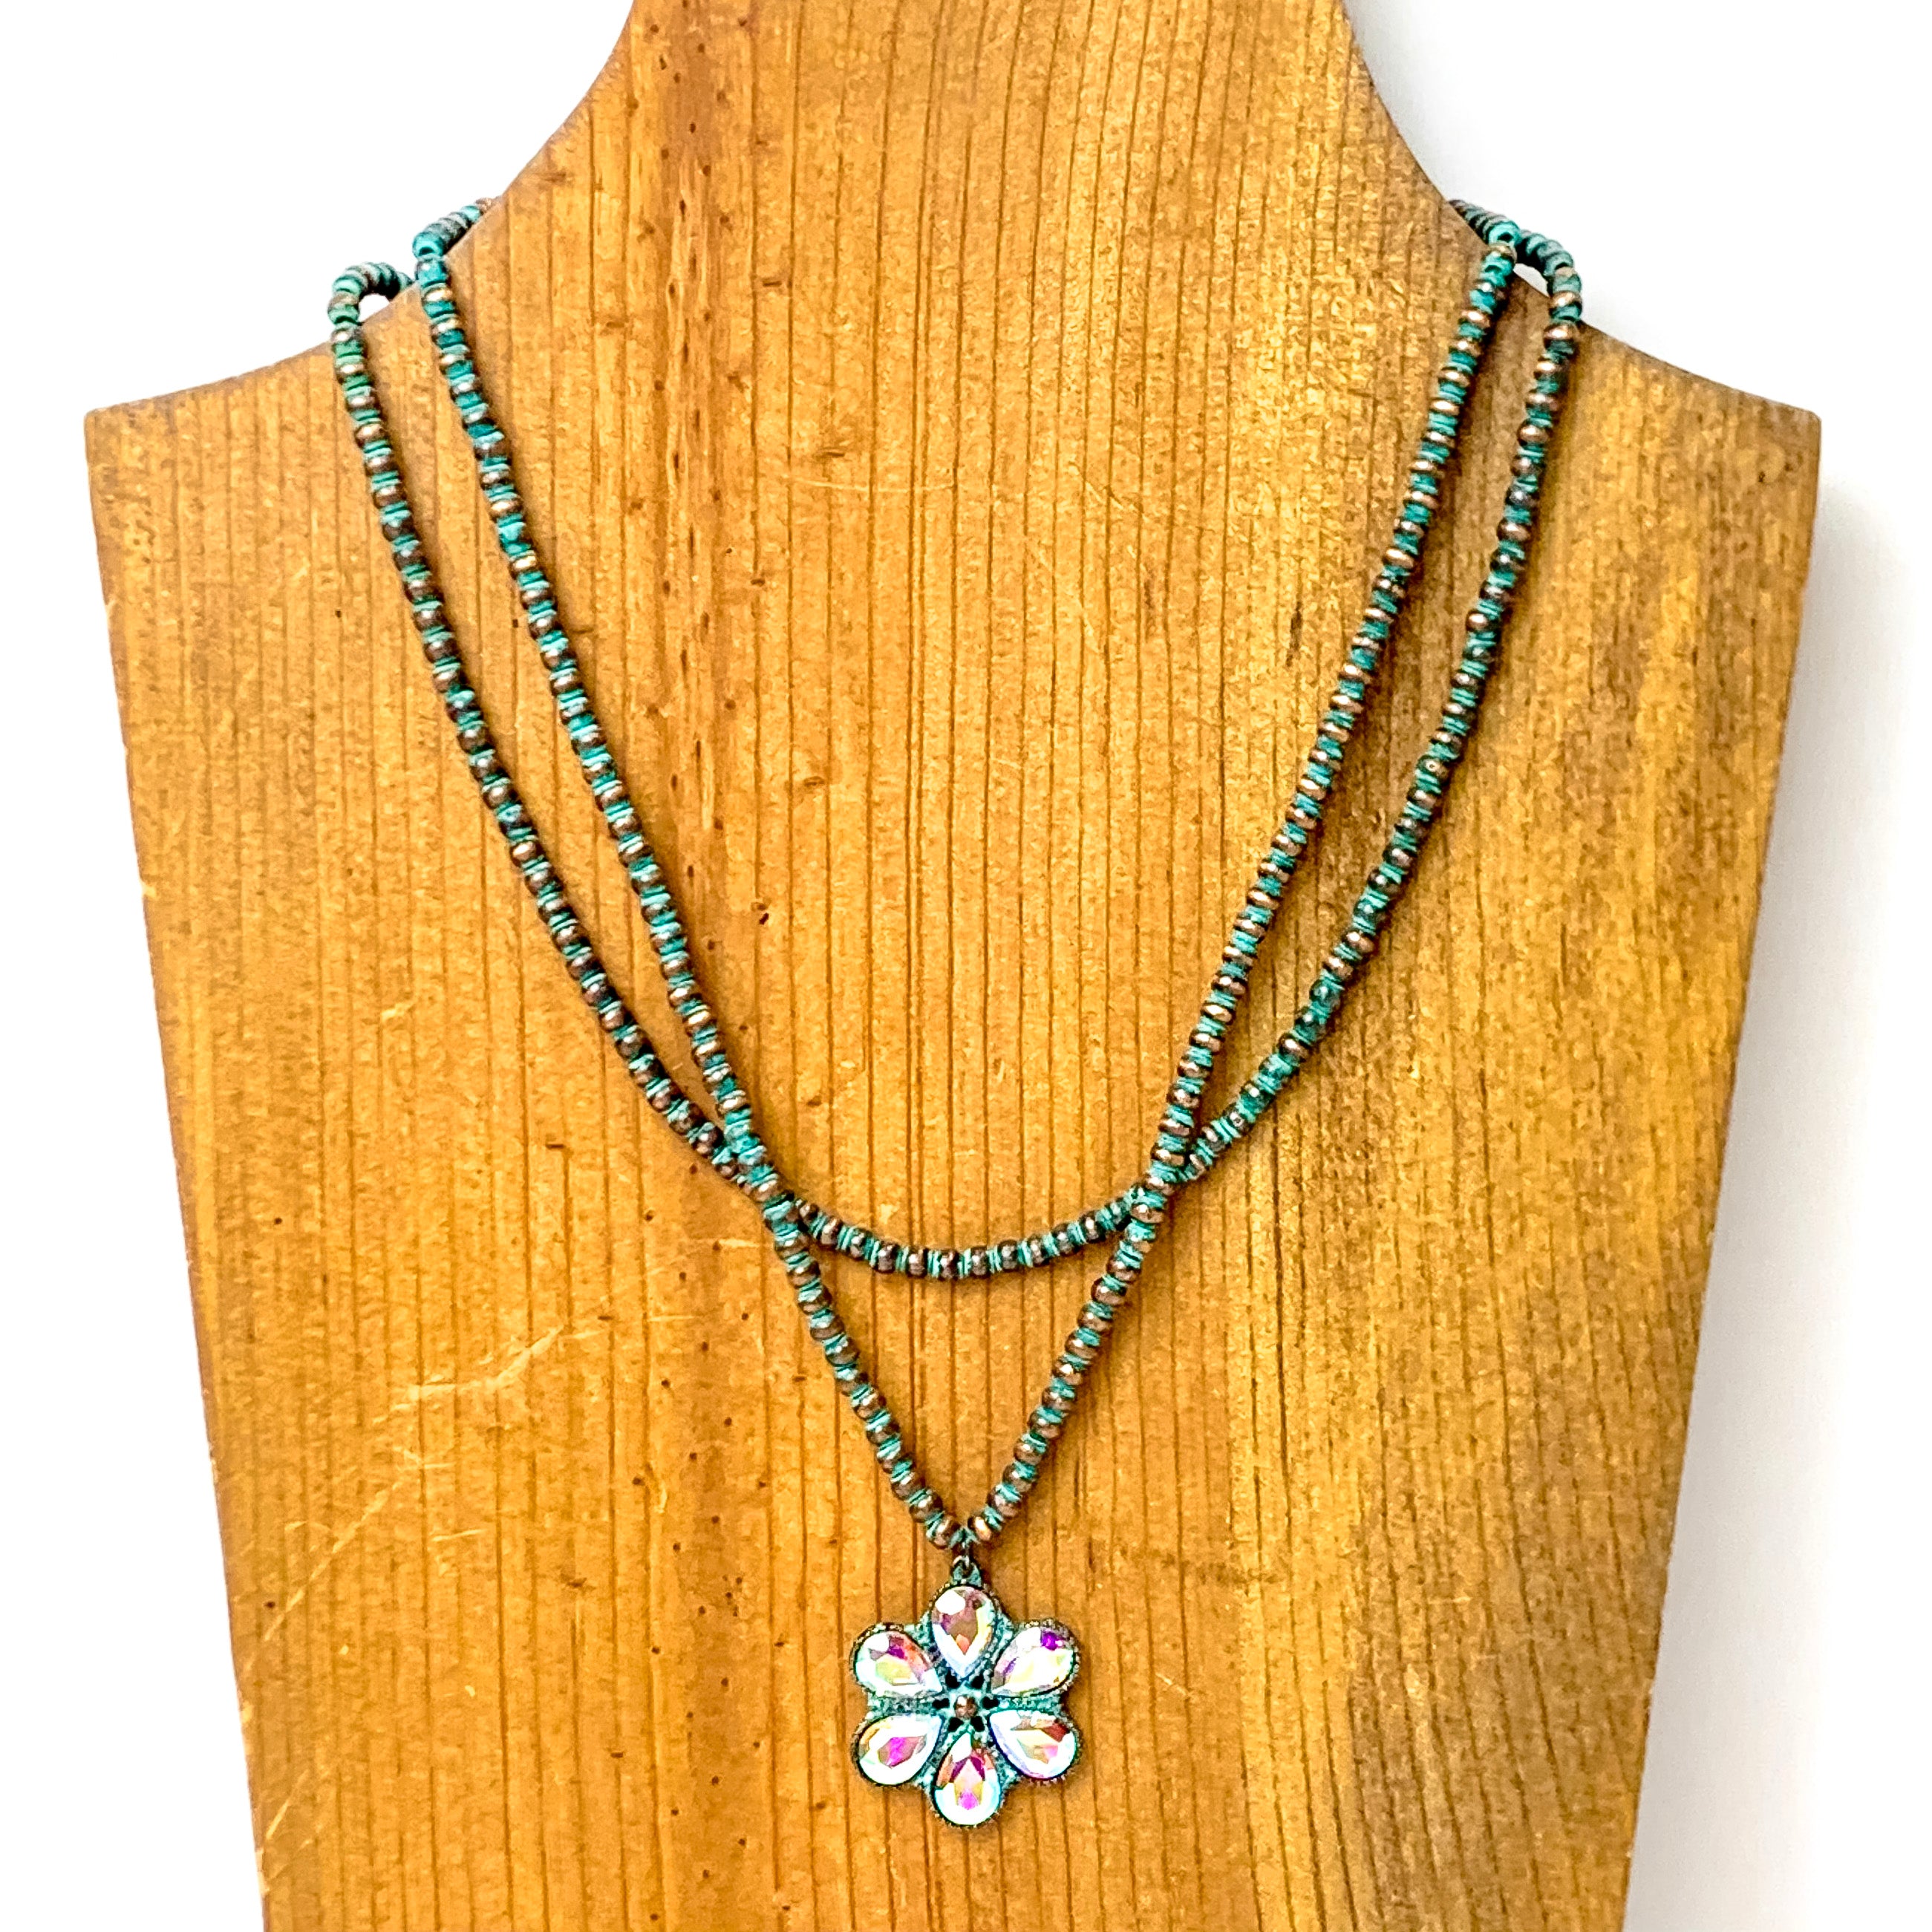 Bourbon Blooms Faux Navajo Pearl Necklace in Patina Tone - Giddy Up Glamour Boutique